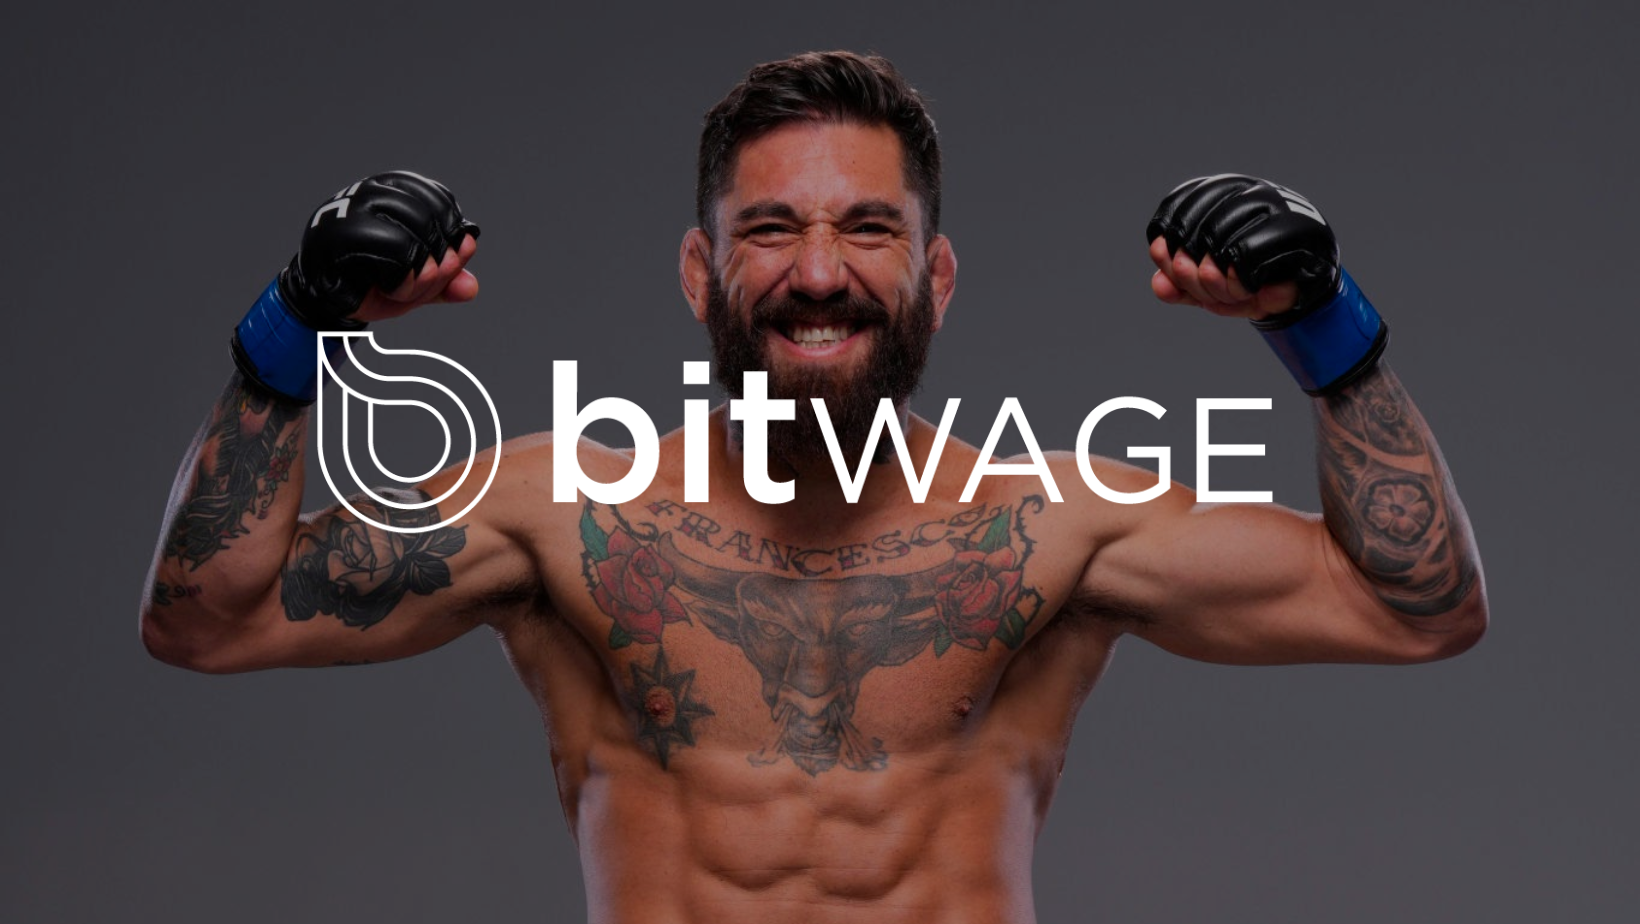 Argentinian UFC Athlete Guido Cannetti Joins Bitwage as an Ambassador